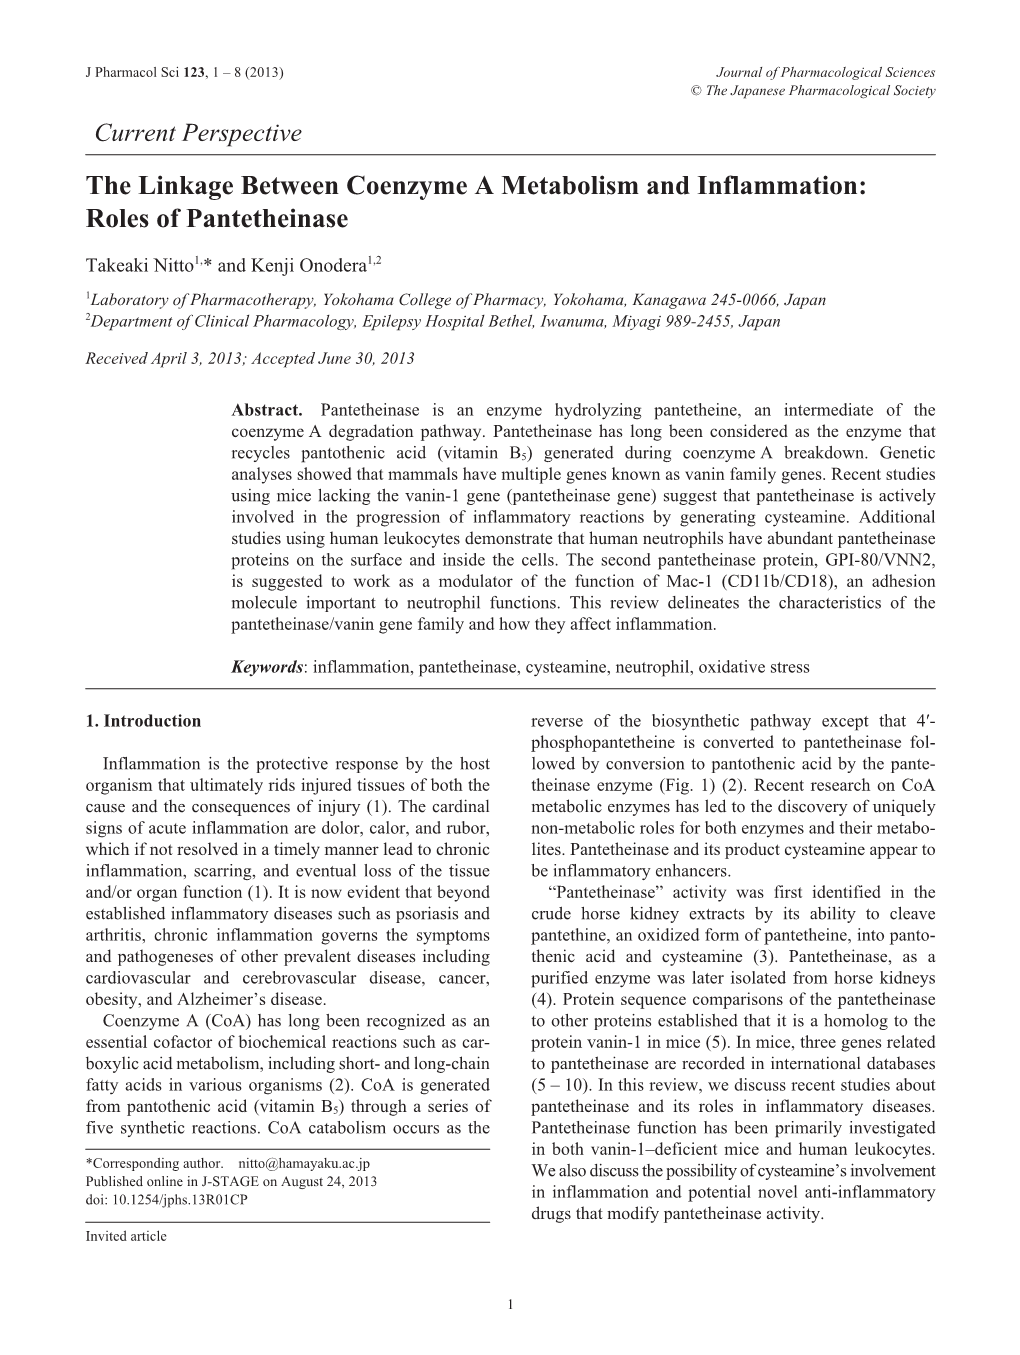 The Linkage Between Coenzyme a Metabolism and Inflammation: Roles of Pantetheinase